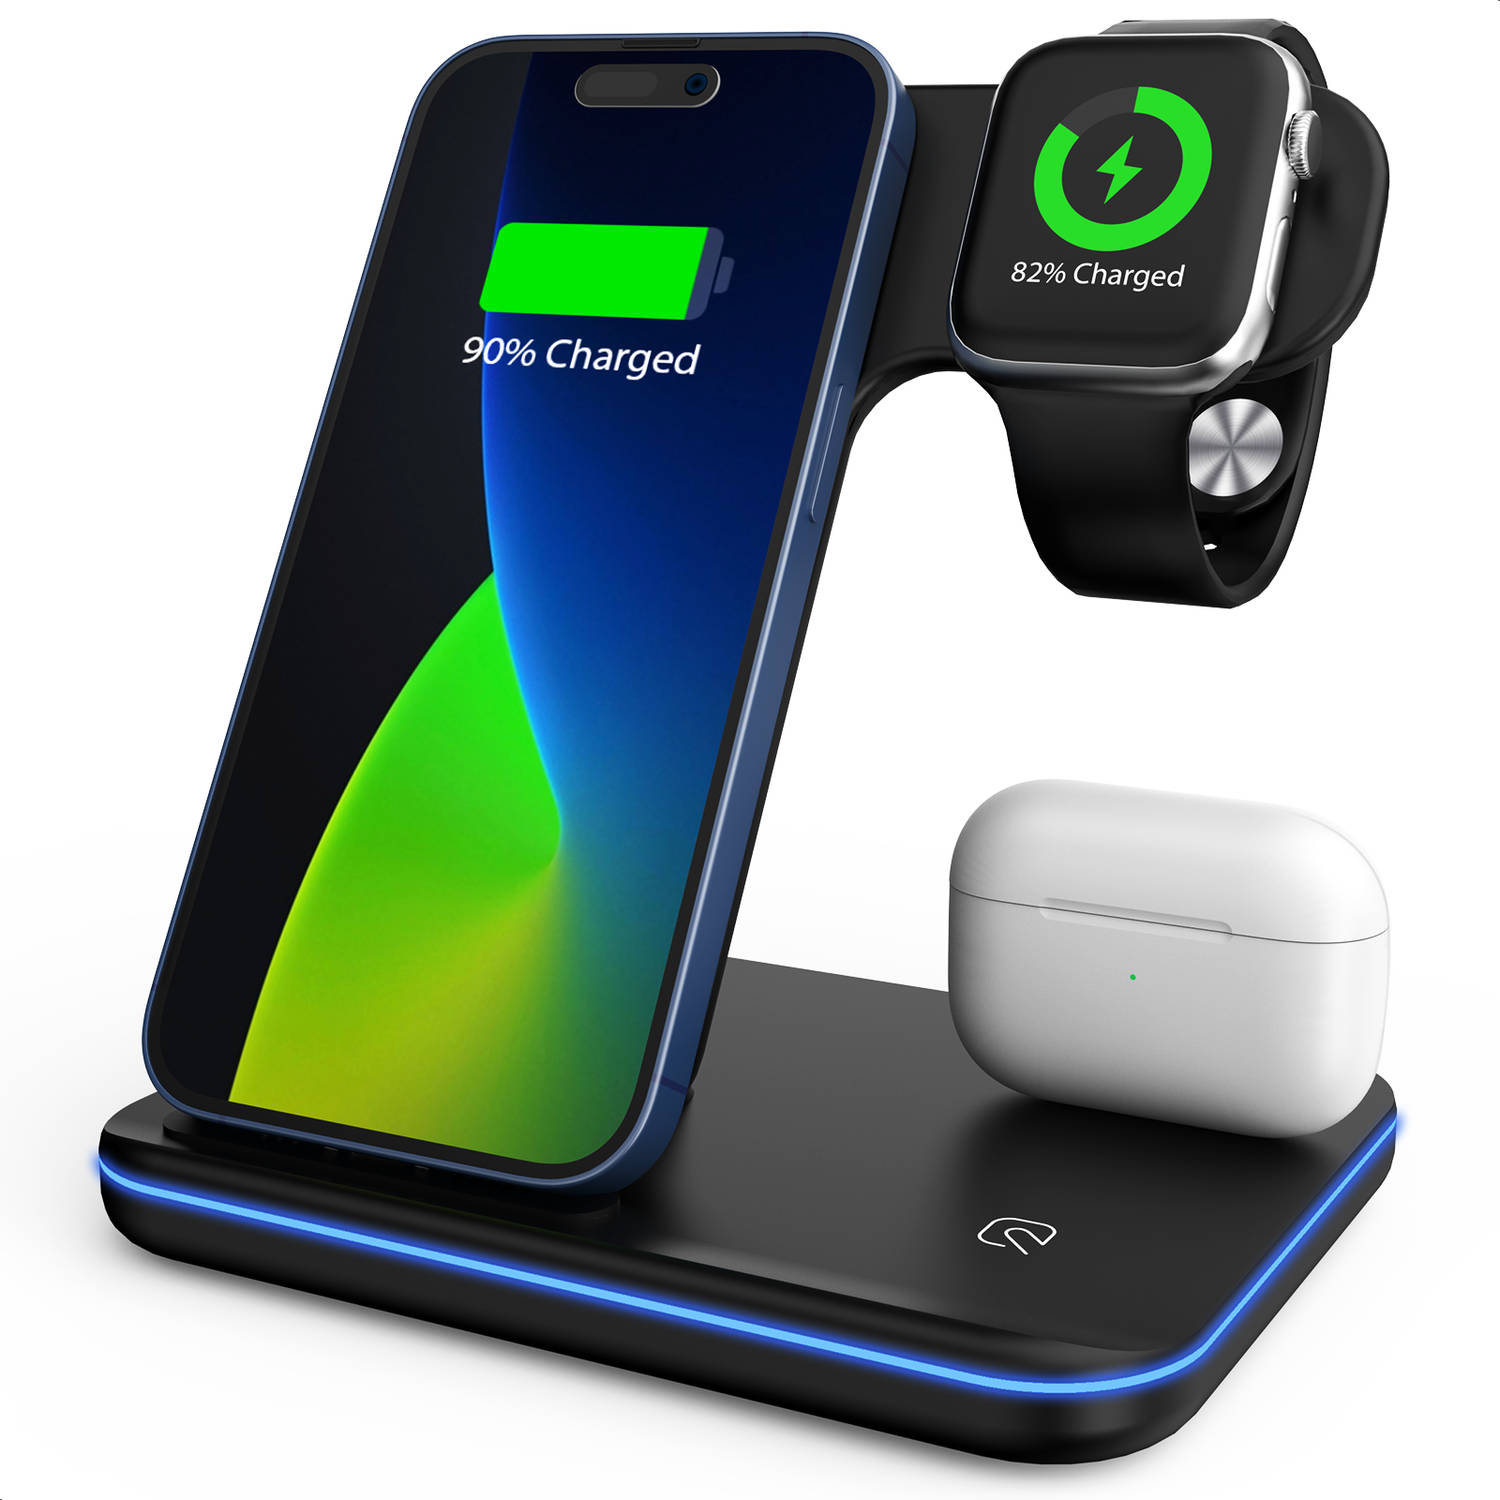 Strex 3-in-1 Draadloze Oplader - Wireless Charger - 15W Fast Charger - Oplaadstation Met Snellader Voor Smartphone/iPhone/Apple Watch/AirPods